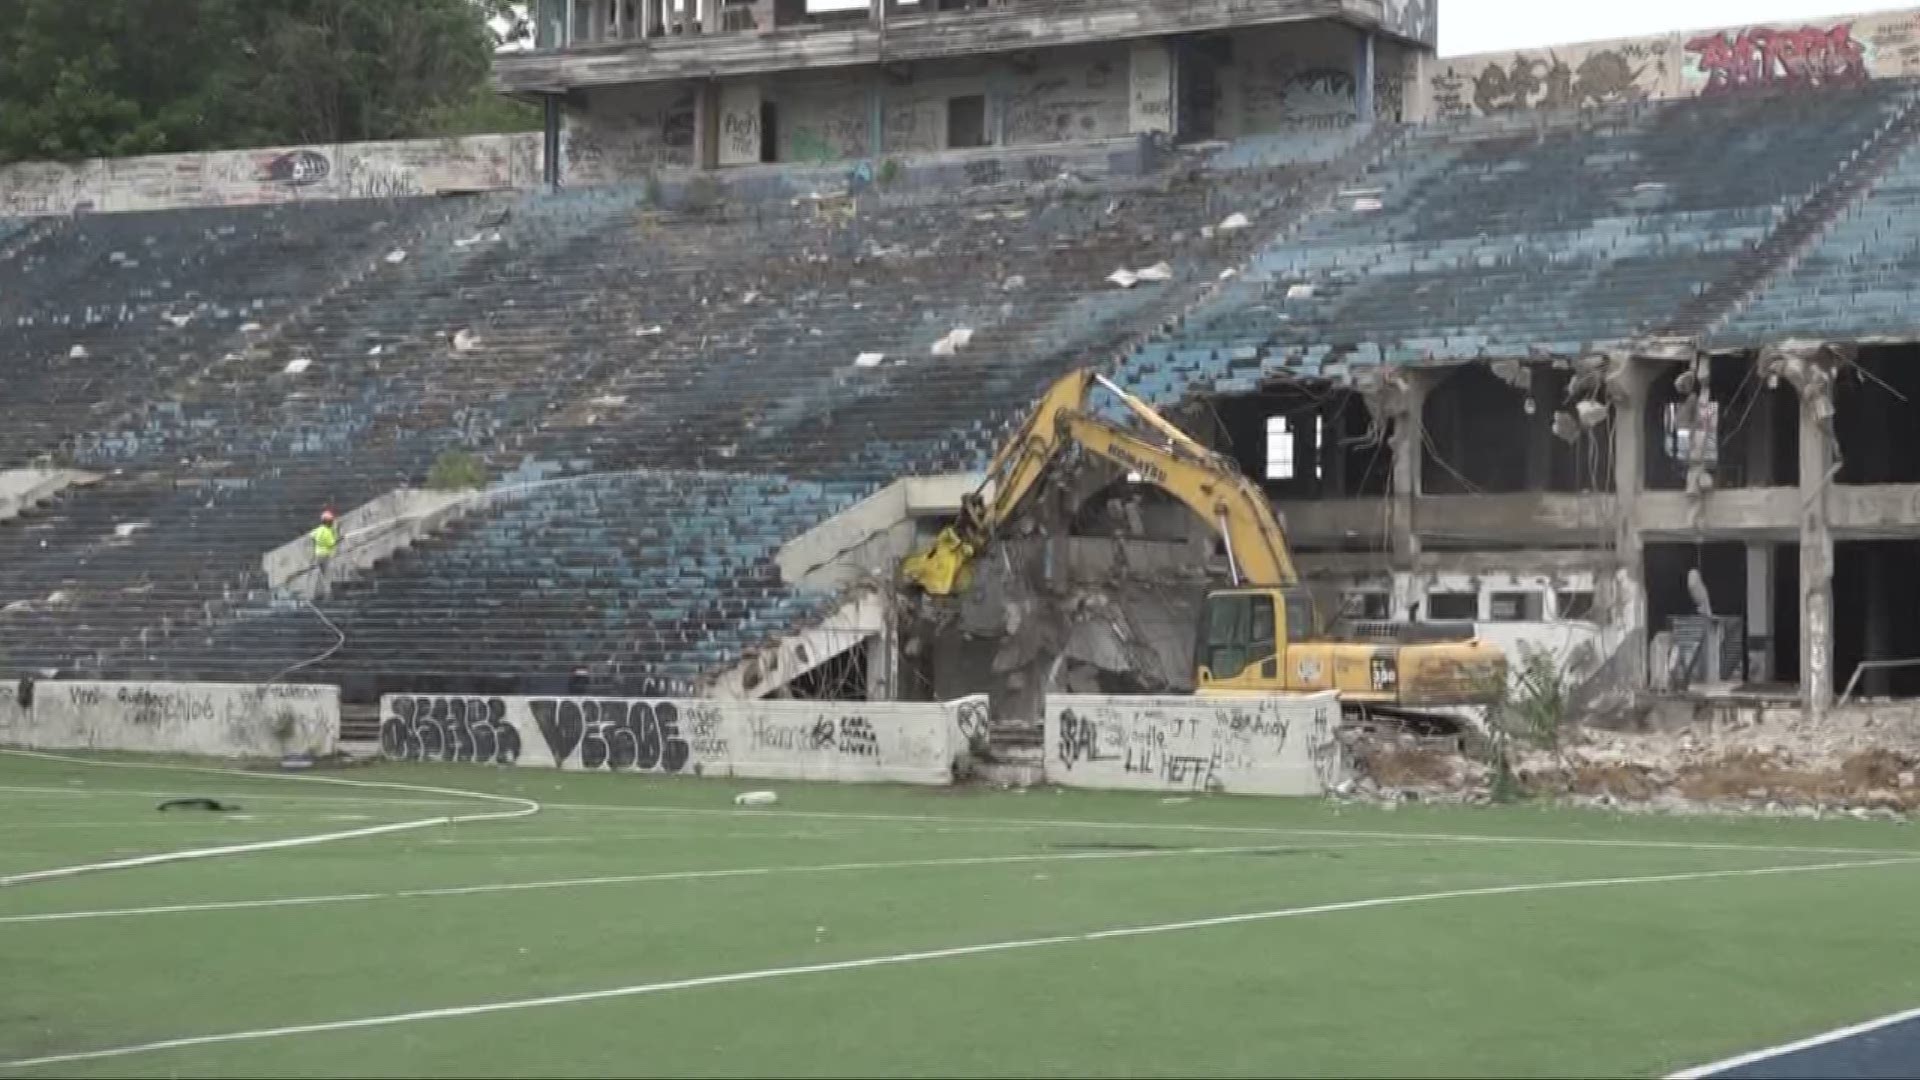 Saying goodbye to an Akron icon: Demolition of Rubber Bowl begins